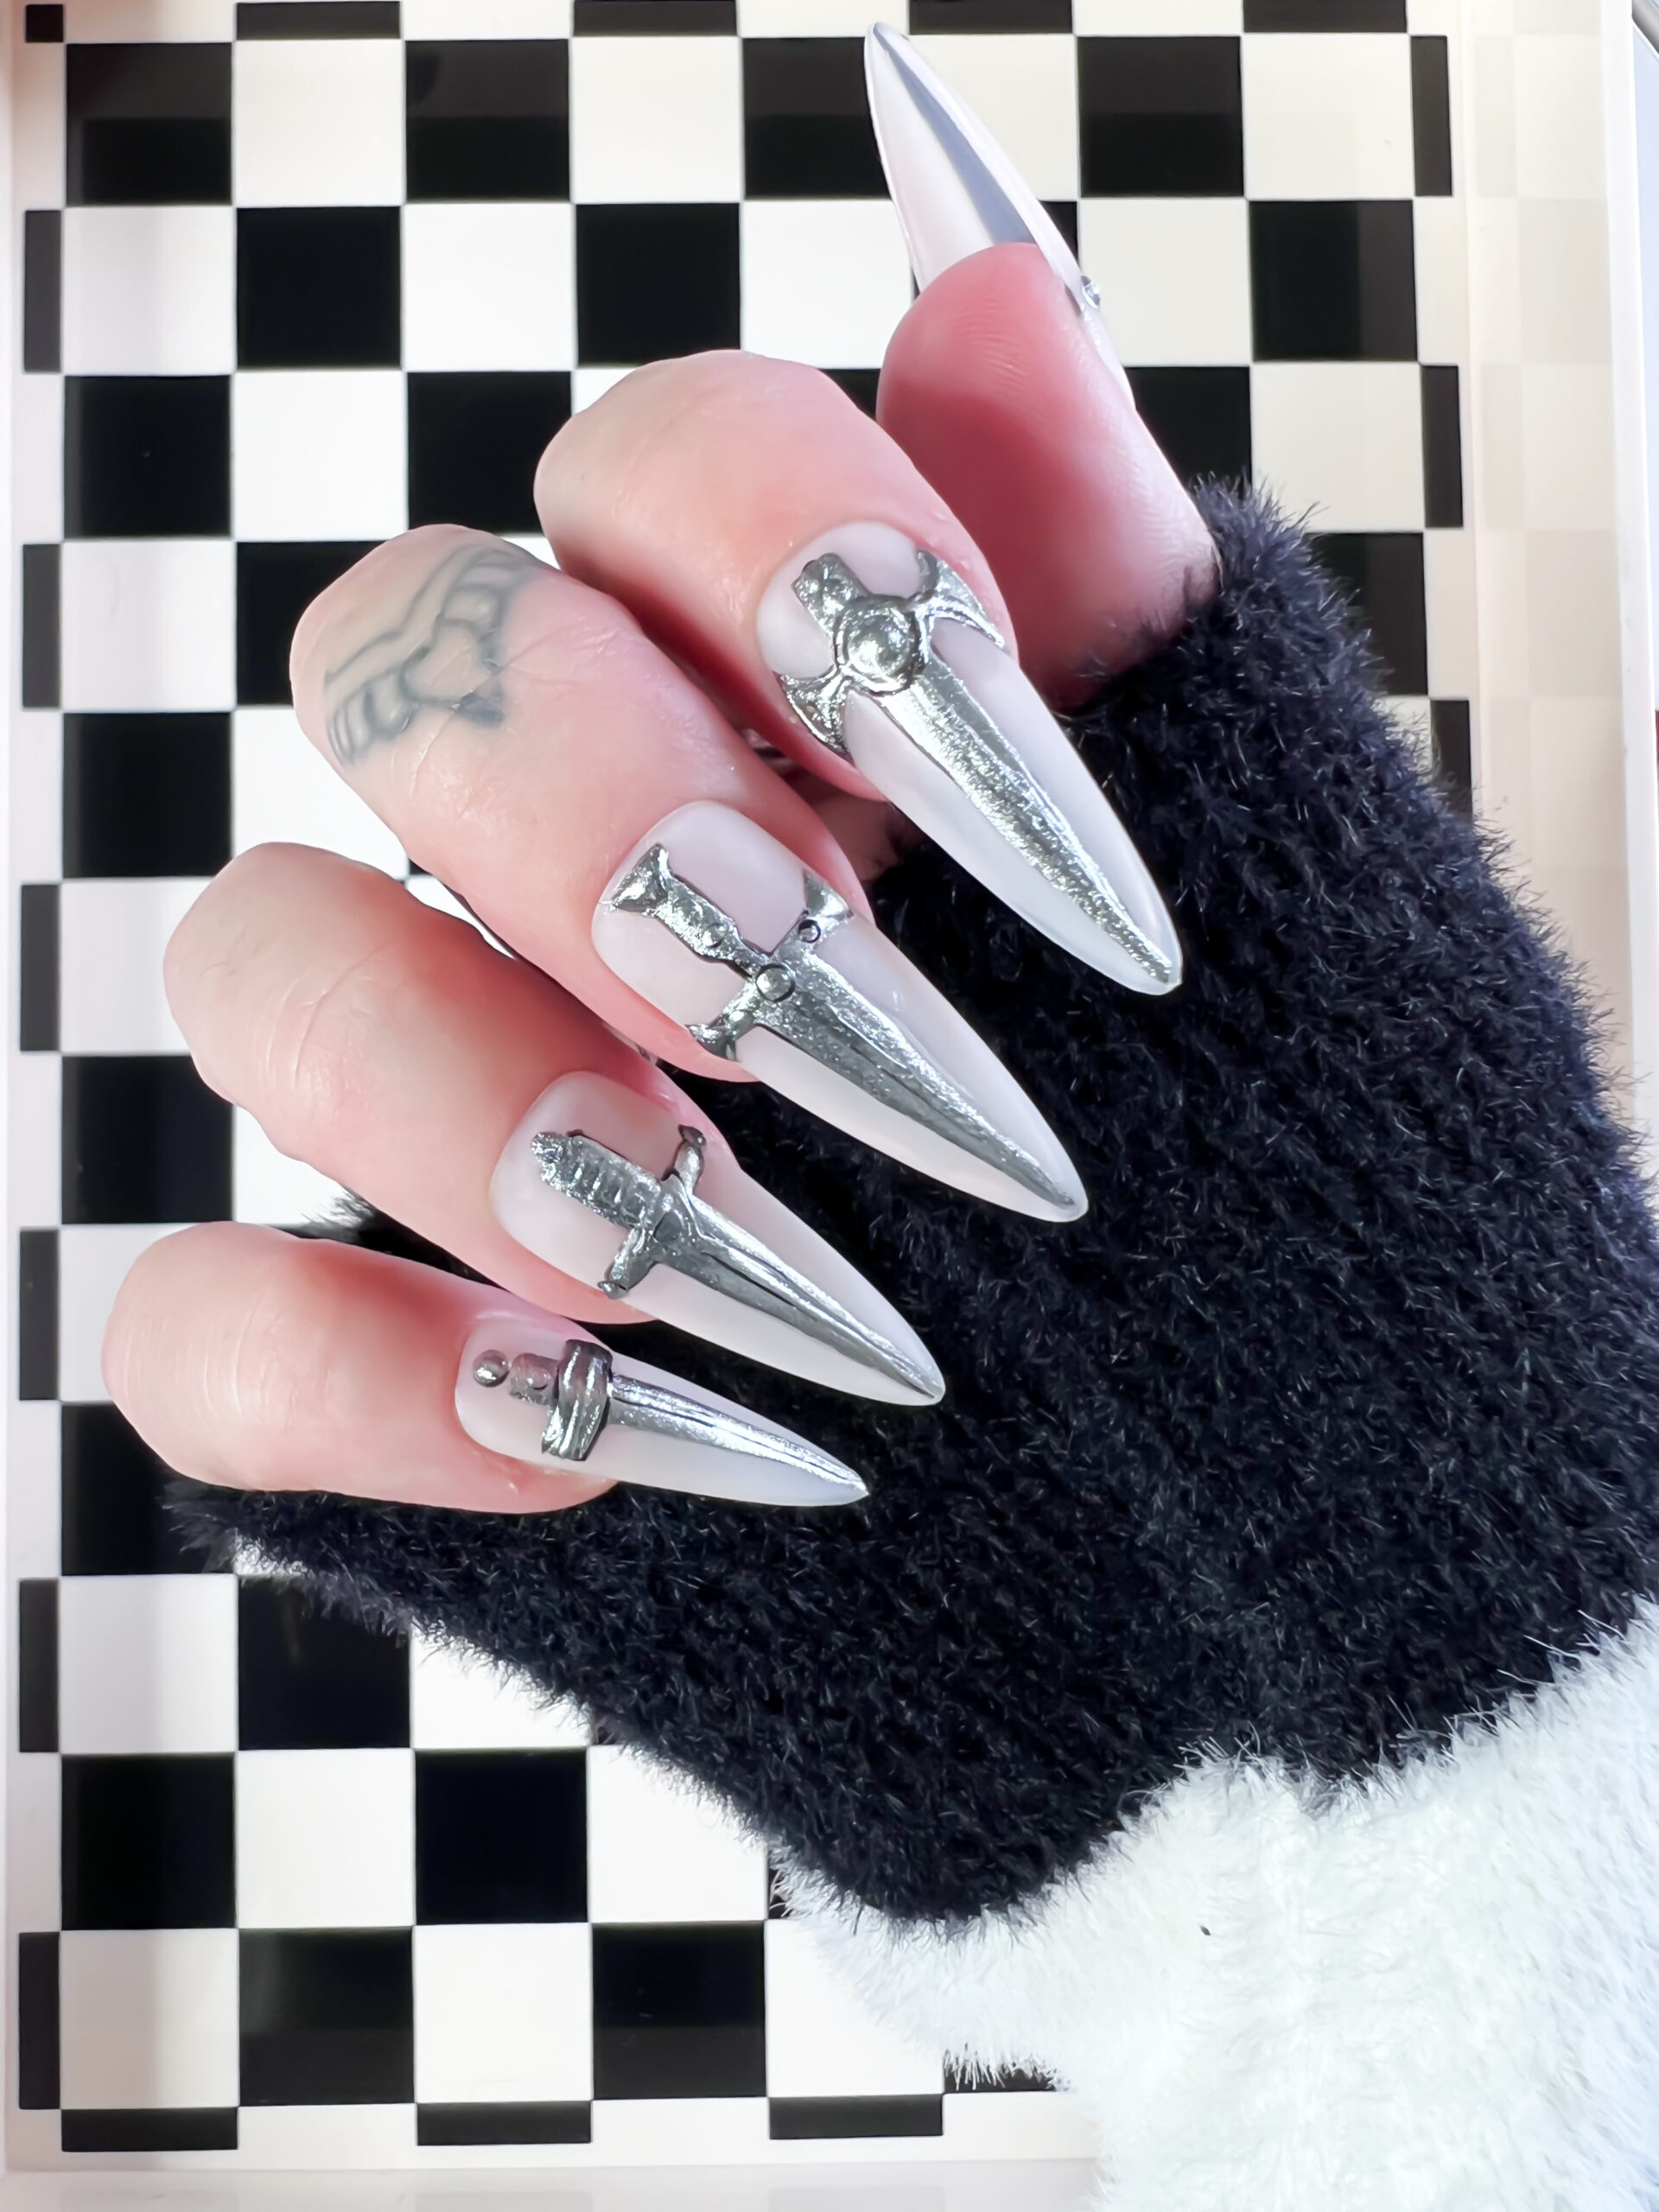 Goth Press On Nails by Soul of Stevie